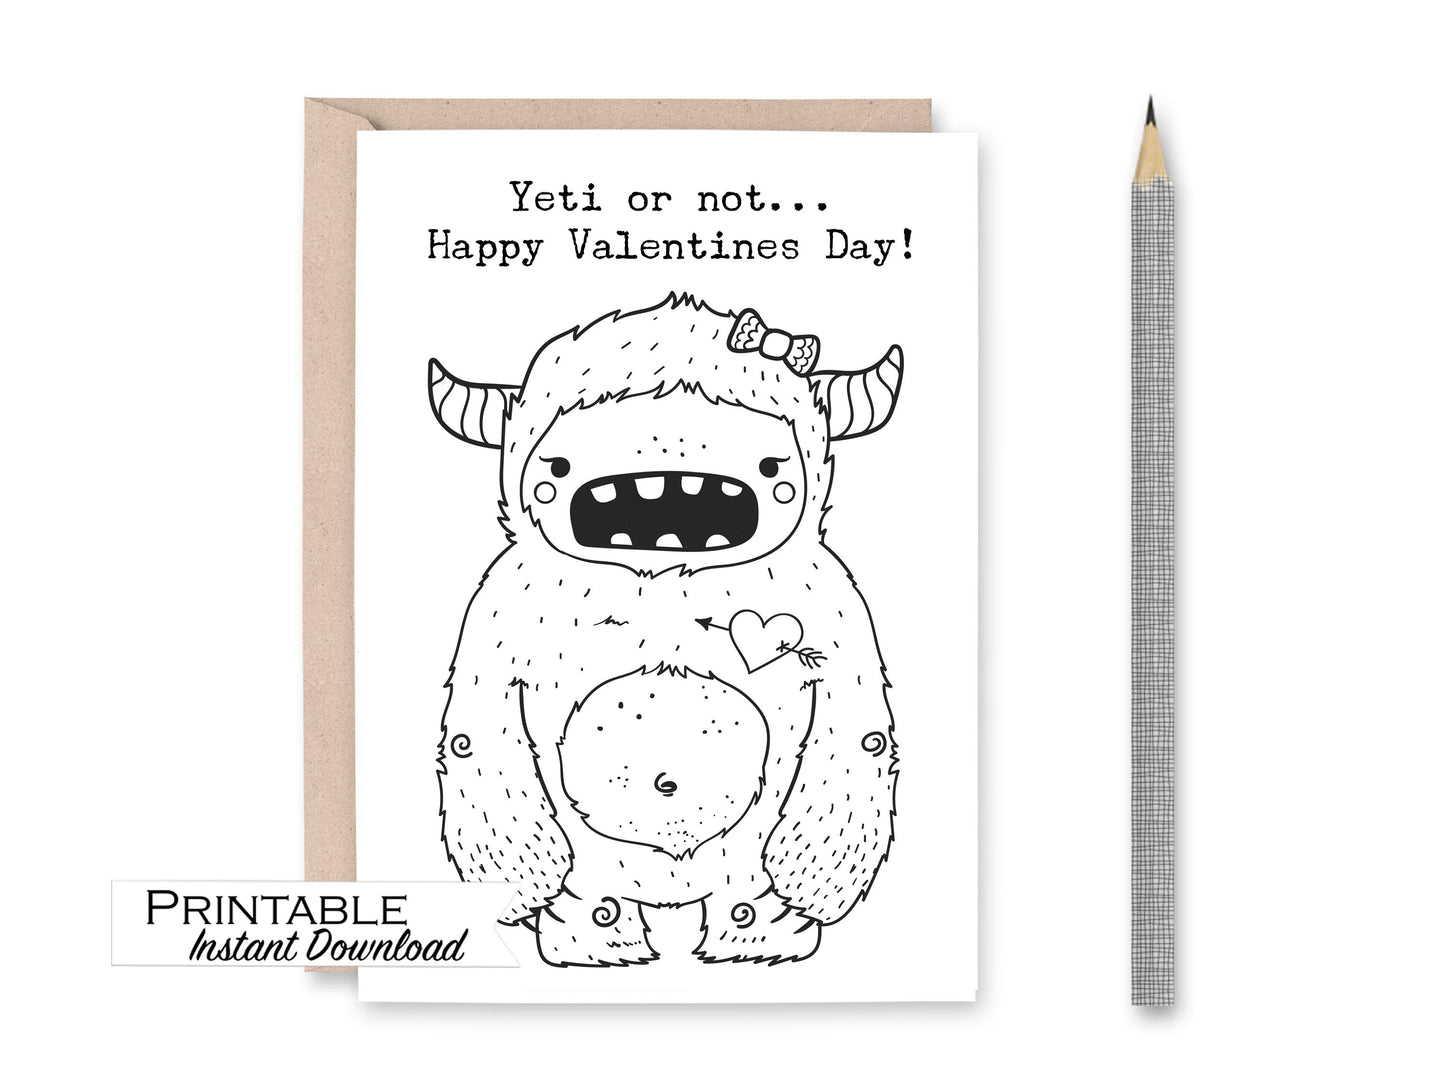 Yeti or not happy valentines day coloring greeting card printable